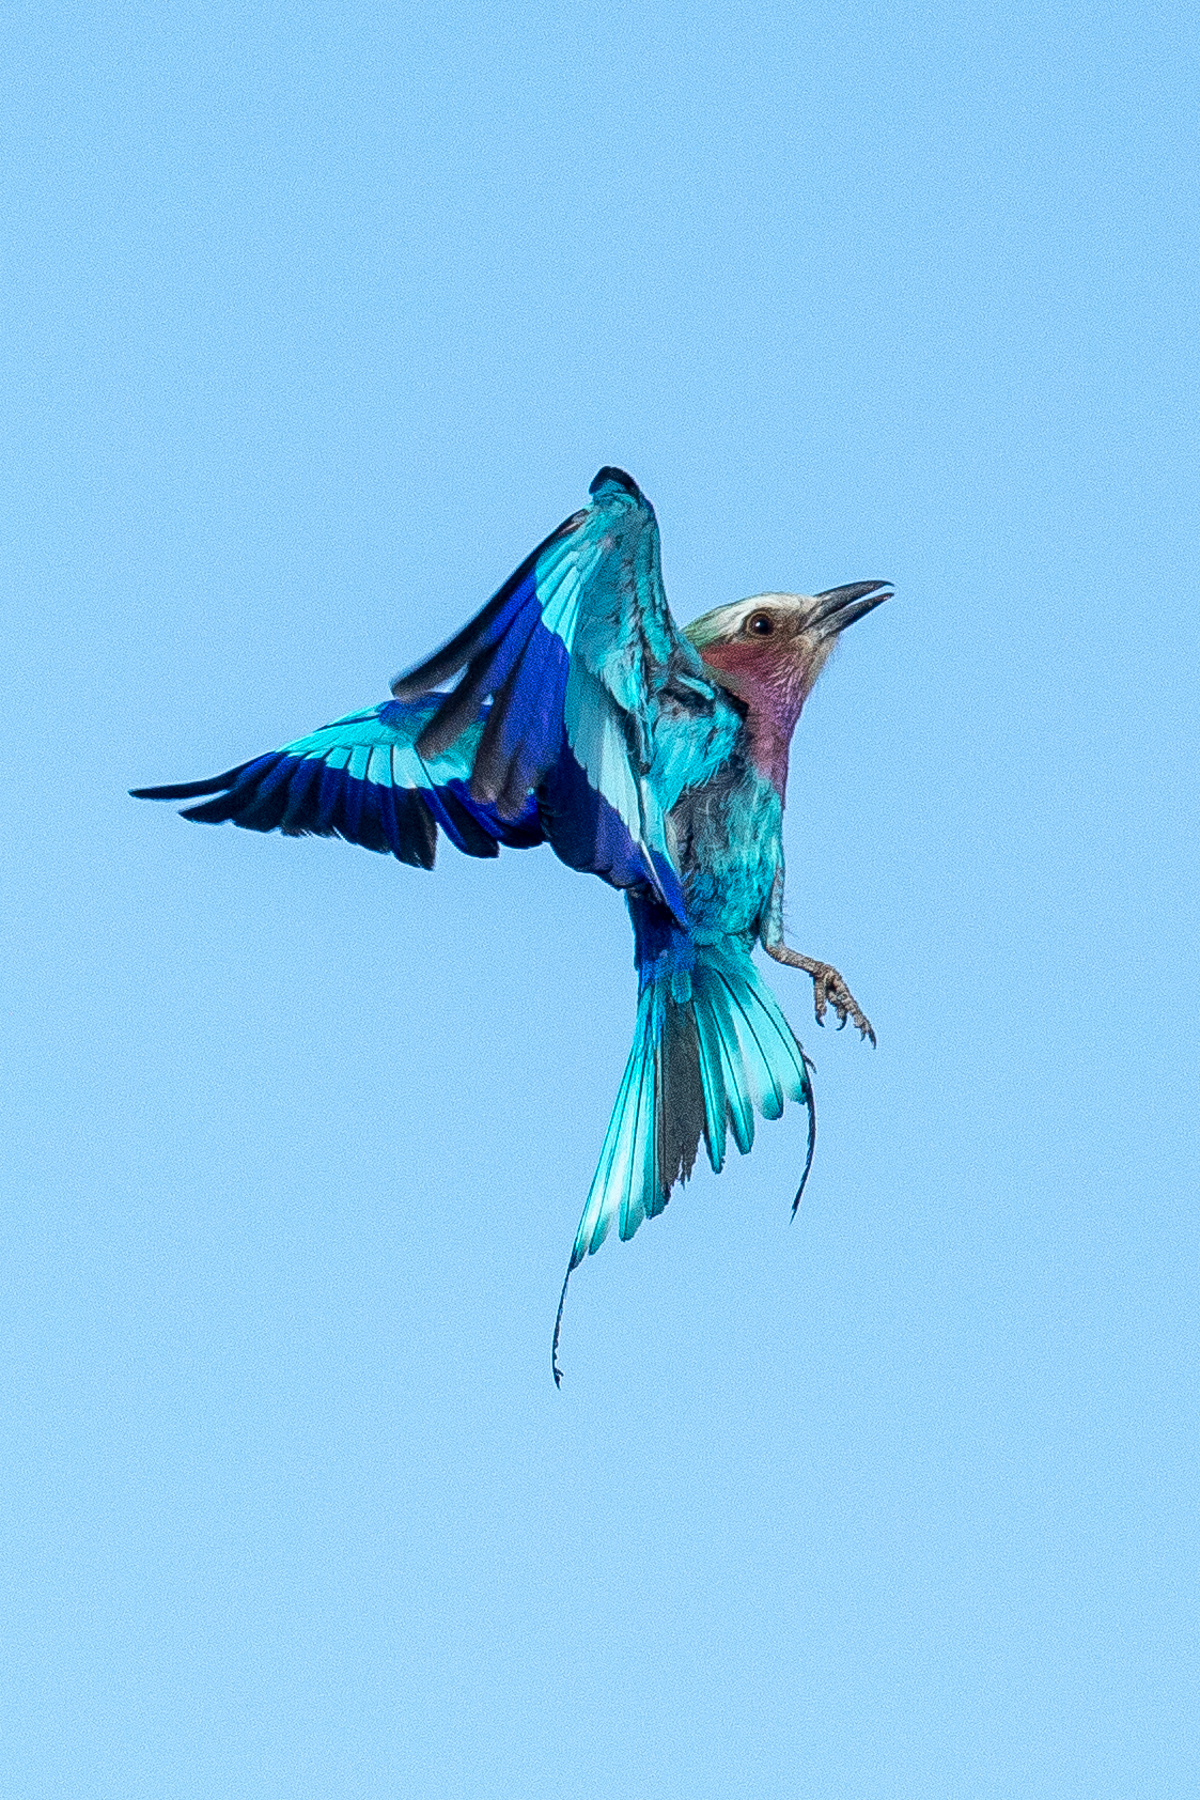 Lilac-breasted Roller flight portrait